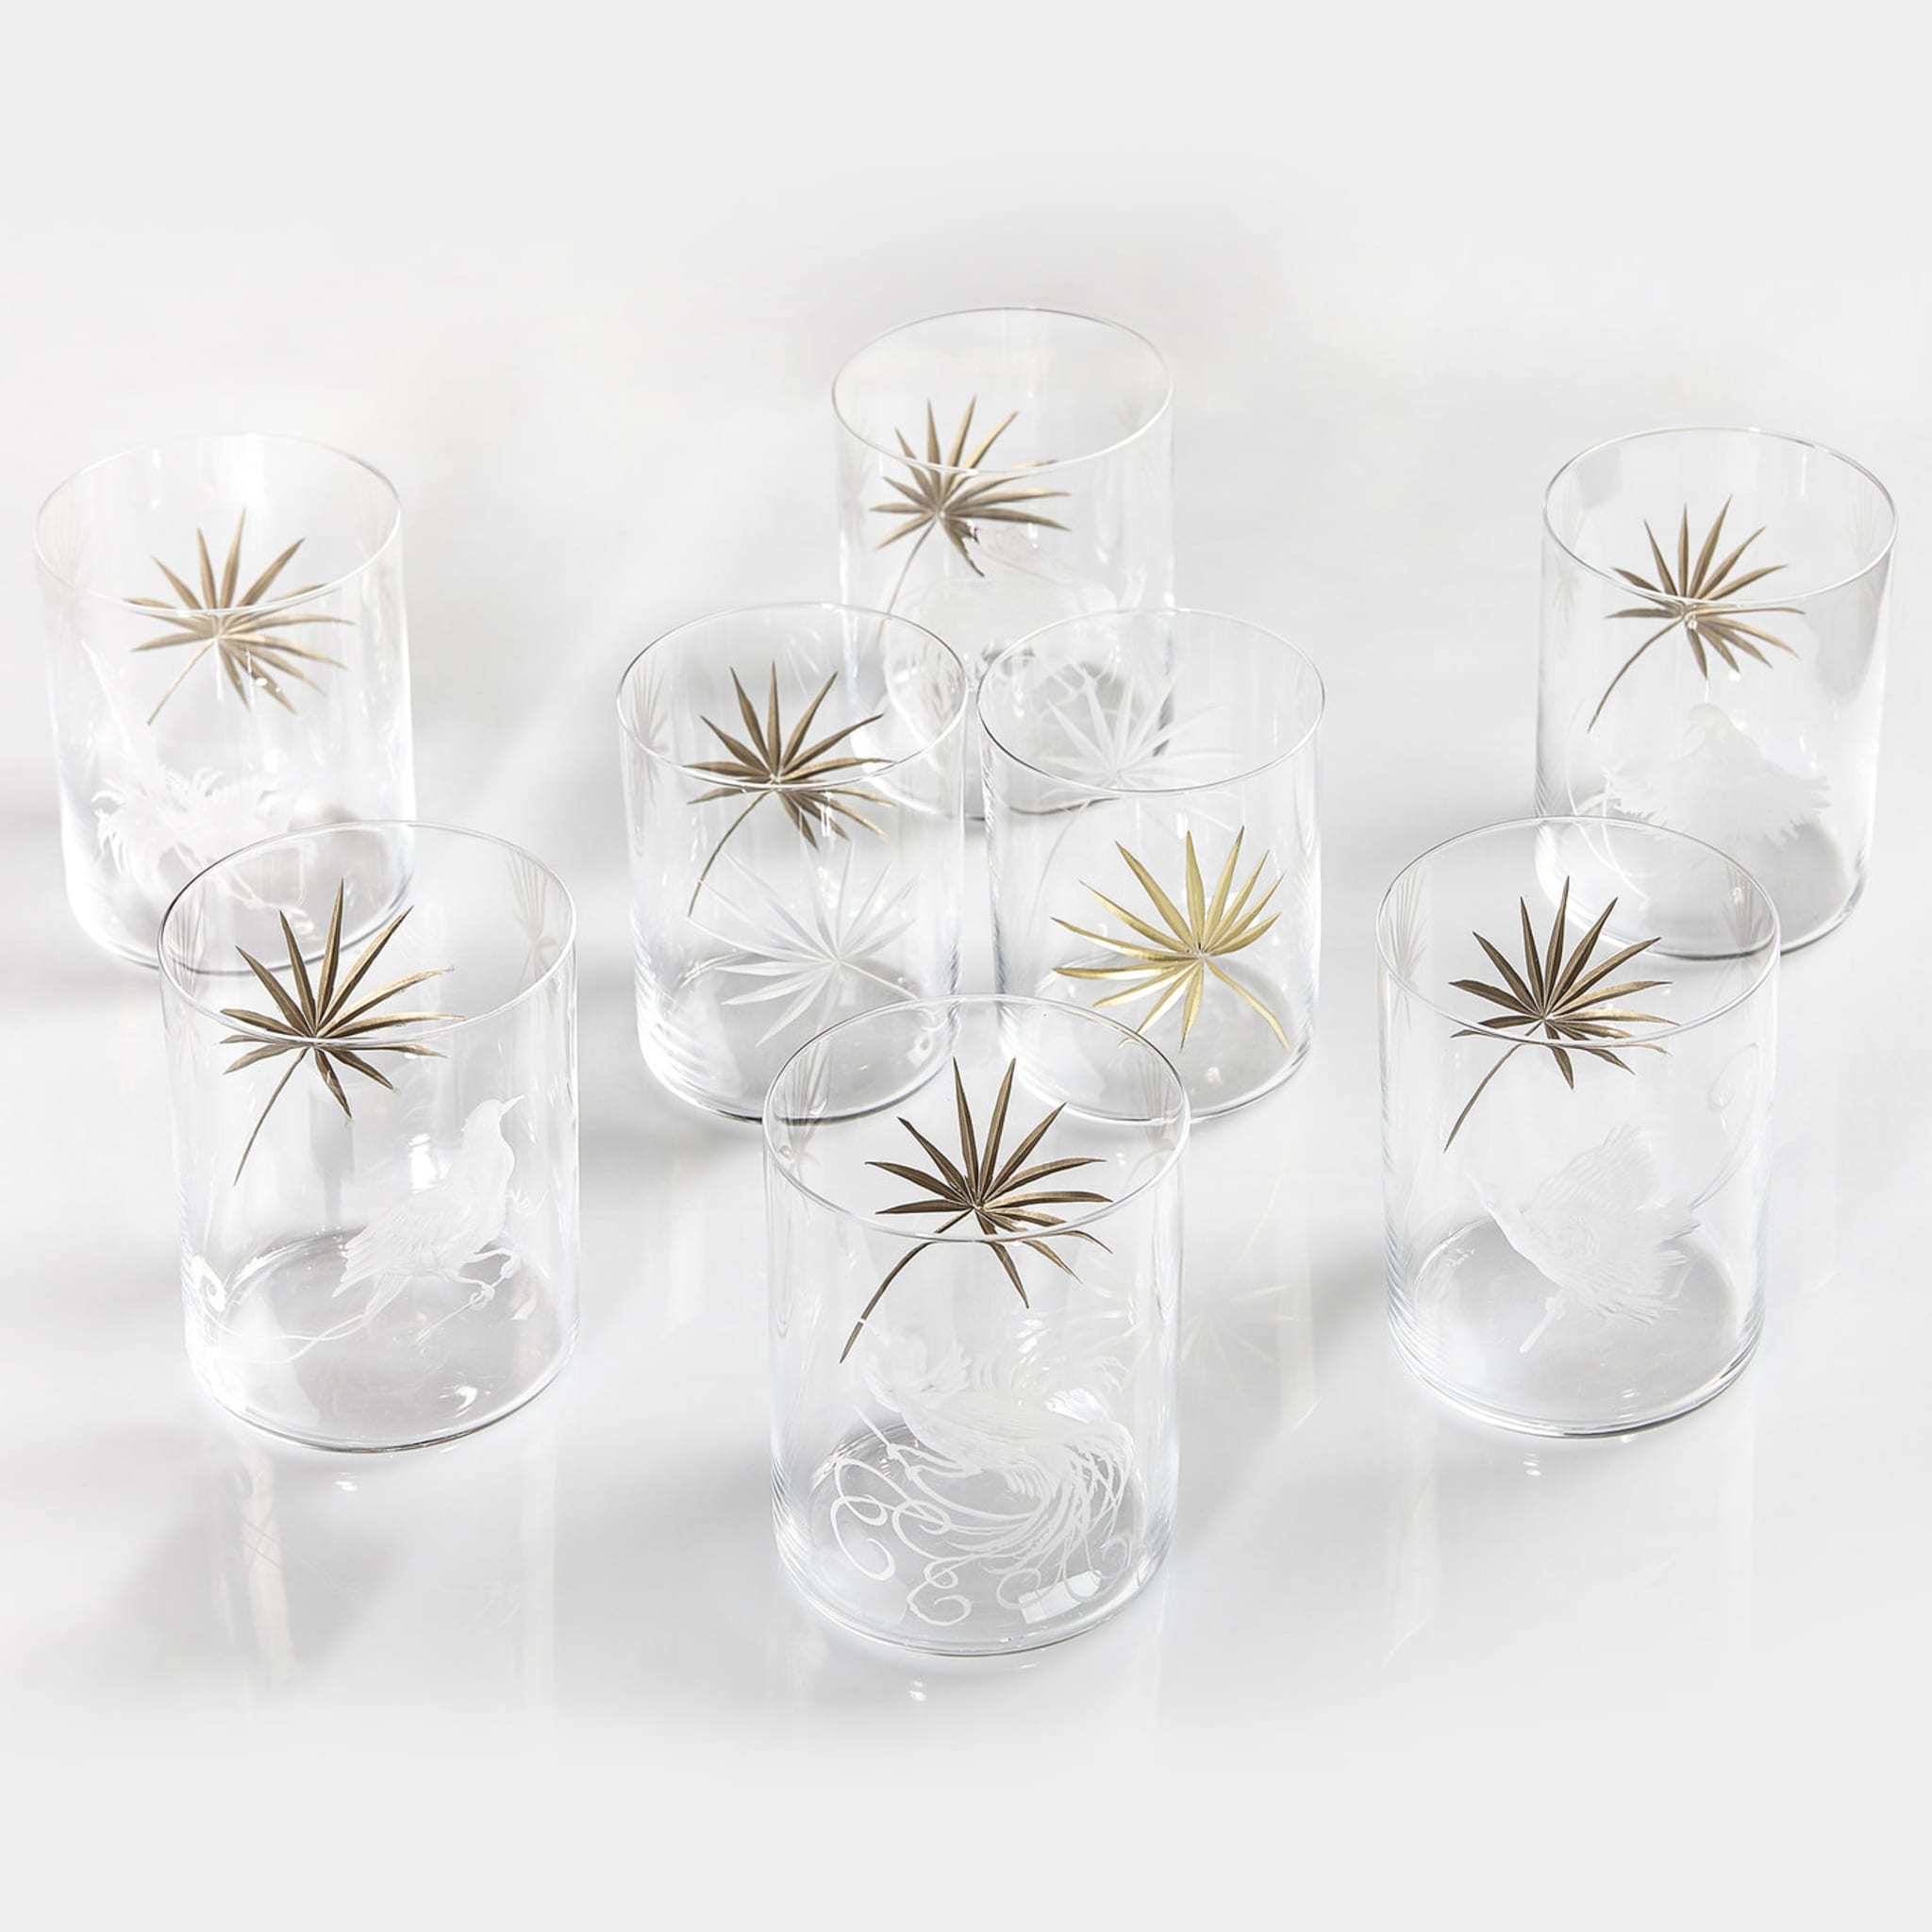 Set of 2 Double Palm Glasses - Alternative view 3